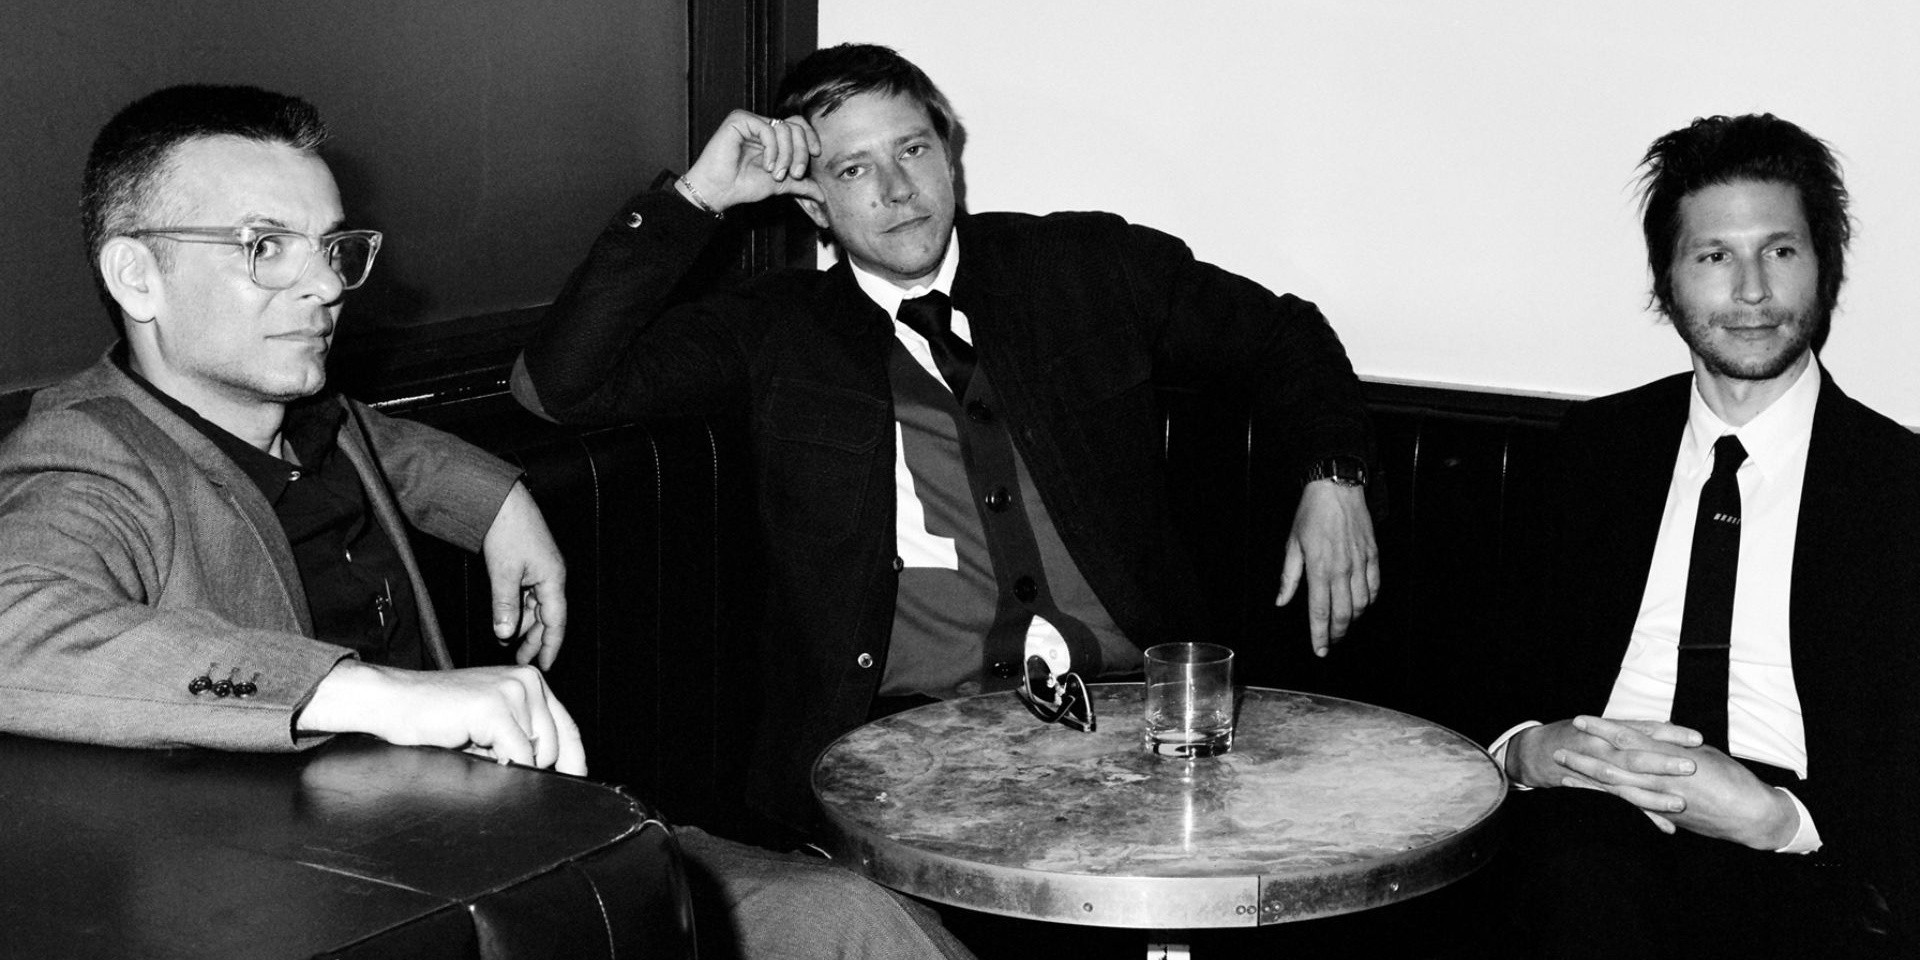 Interpol to release limited edition vinyl for Antics' 15th anniversary 